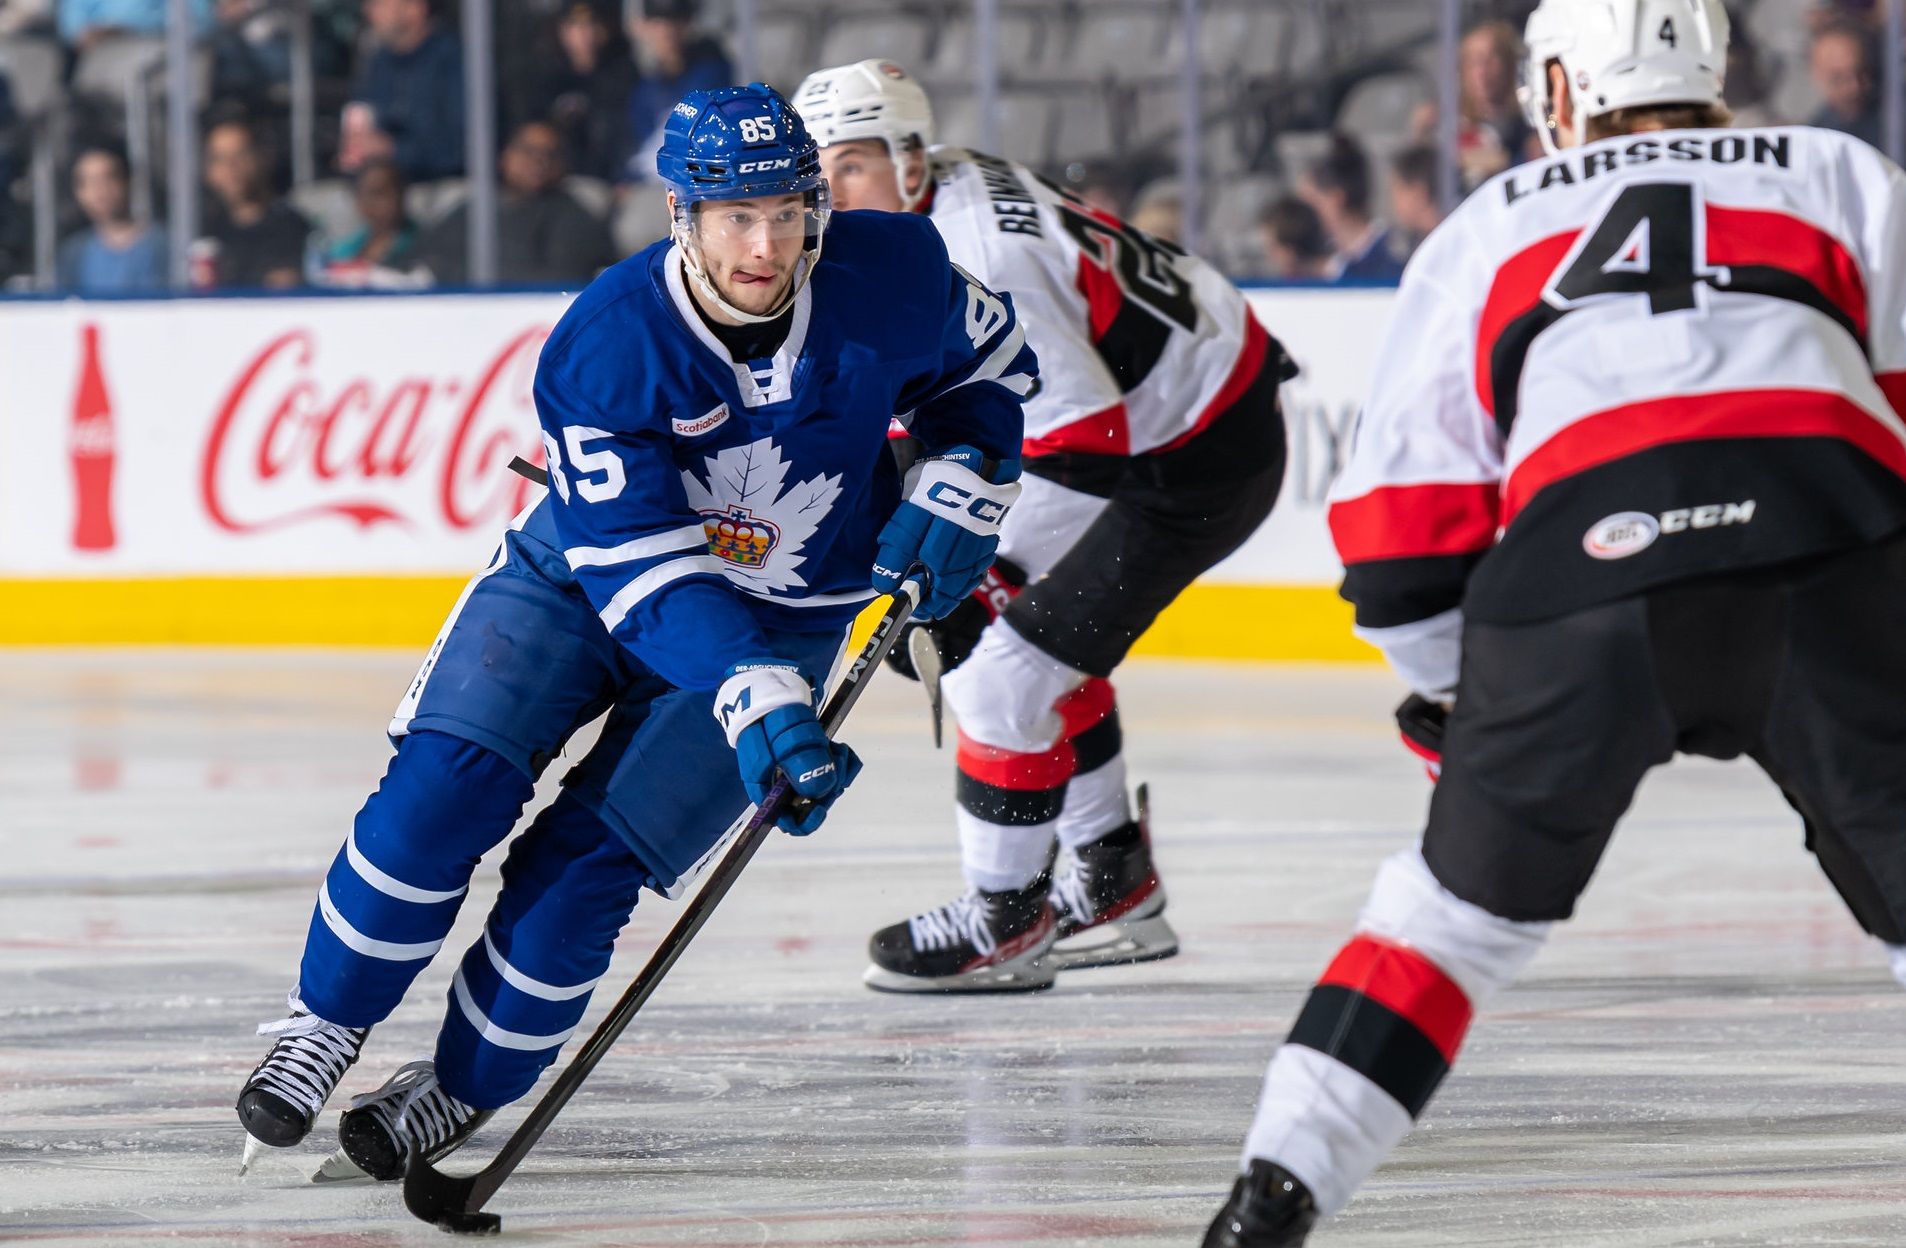 Marlies head to the playoffs consistently inconsistent